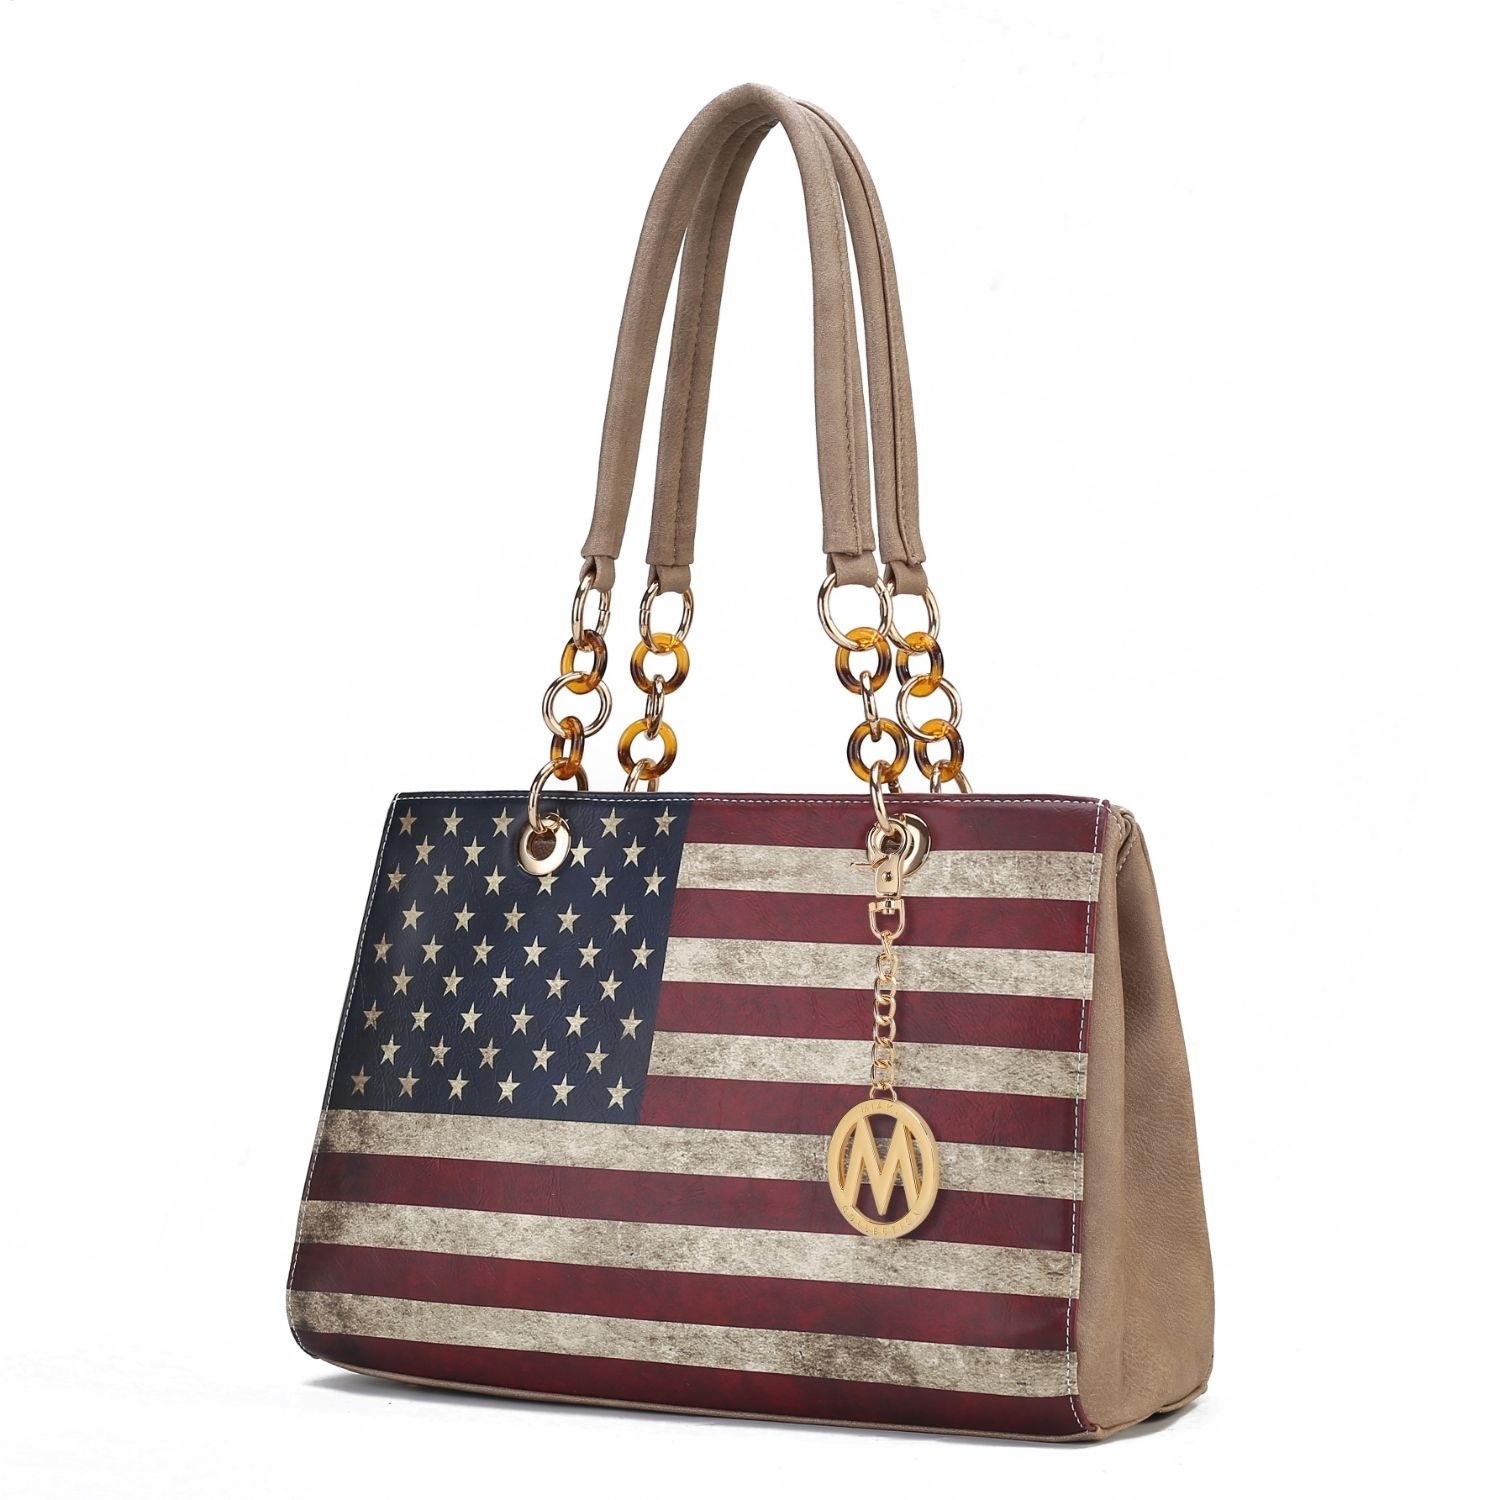 MKF Collection Nevaeh Vegan Leather Patriotic Pattern Women's Shoulder Bag By Mia K - Taupe